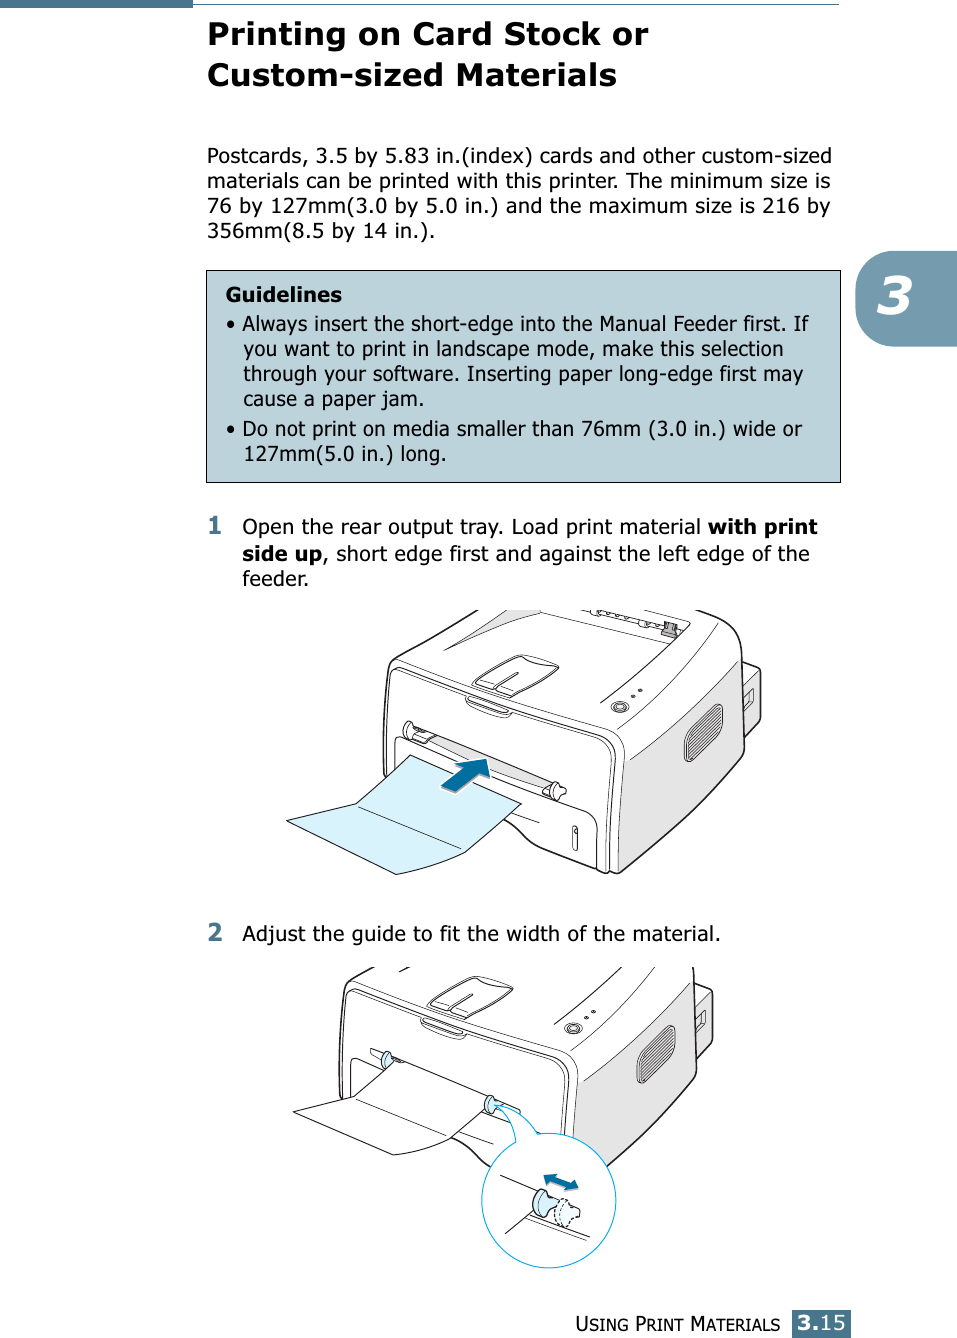 USING PRINT MATERIALS3.153Printing on Card Stock or Custom-sized MaterialsPostcards, 3.5 by 5.83 in.(index) cards and other custom-sized materials can be printed with this printer. The minimum size is 76 by 127mm(3.0 by 5.0 in.) and the maximum size is 216 by 356mm(8.5 by 14 in.).1Open the rear output tray. Load print material with print side up, short edge first and against the left edge of the feeder. 2Adjust the guide to fit the width of the material.Guidelines• Always insert the short-edge into the Manual Feeder first. If you want to print in landscape mode, make this selection through your software. Inserting paper long-edge first may cause a paper jam.• Do not print on media smaller than 76mm (3.0 in.) wide or 127mm(5.0 in.) long.